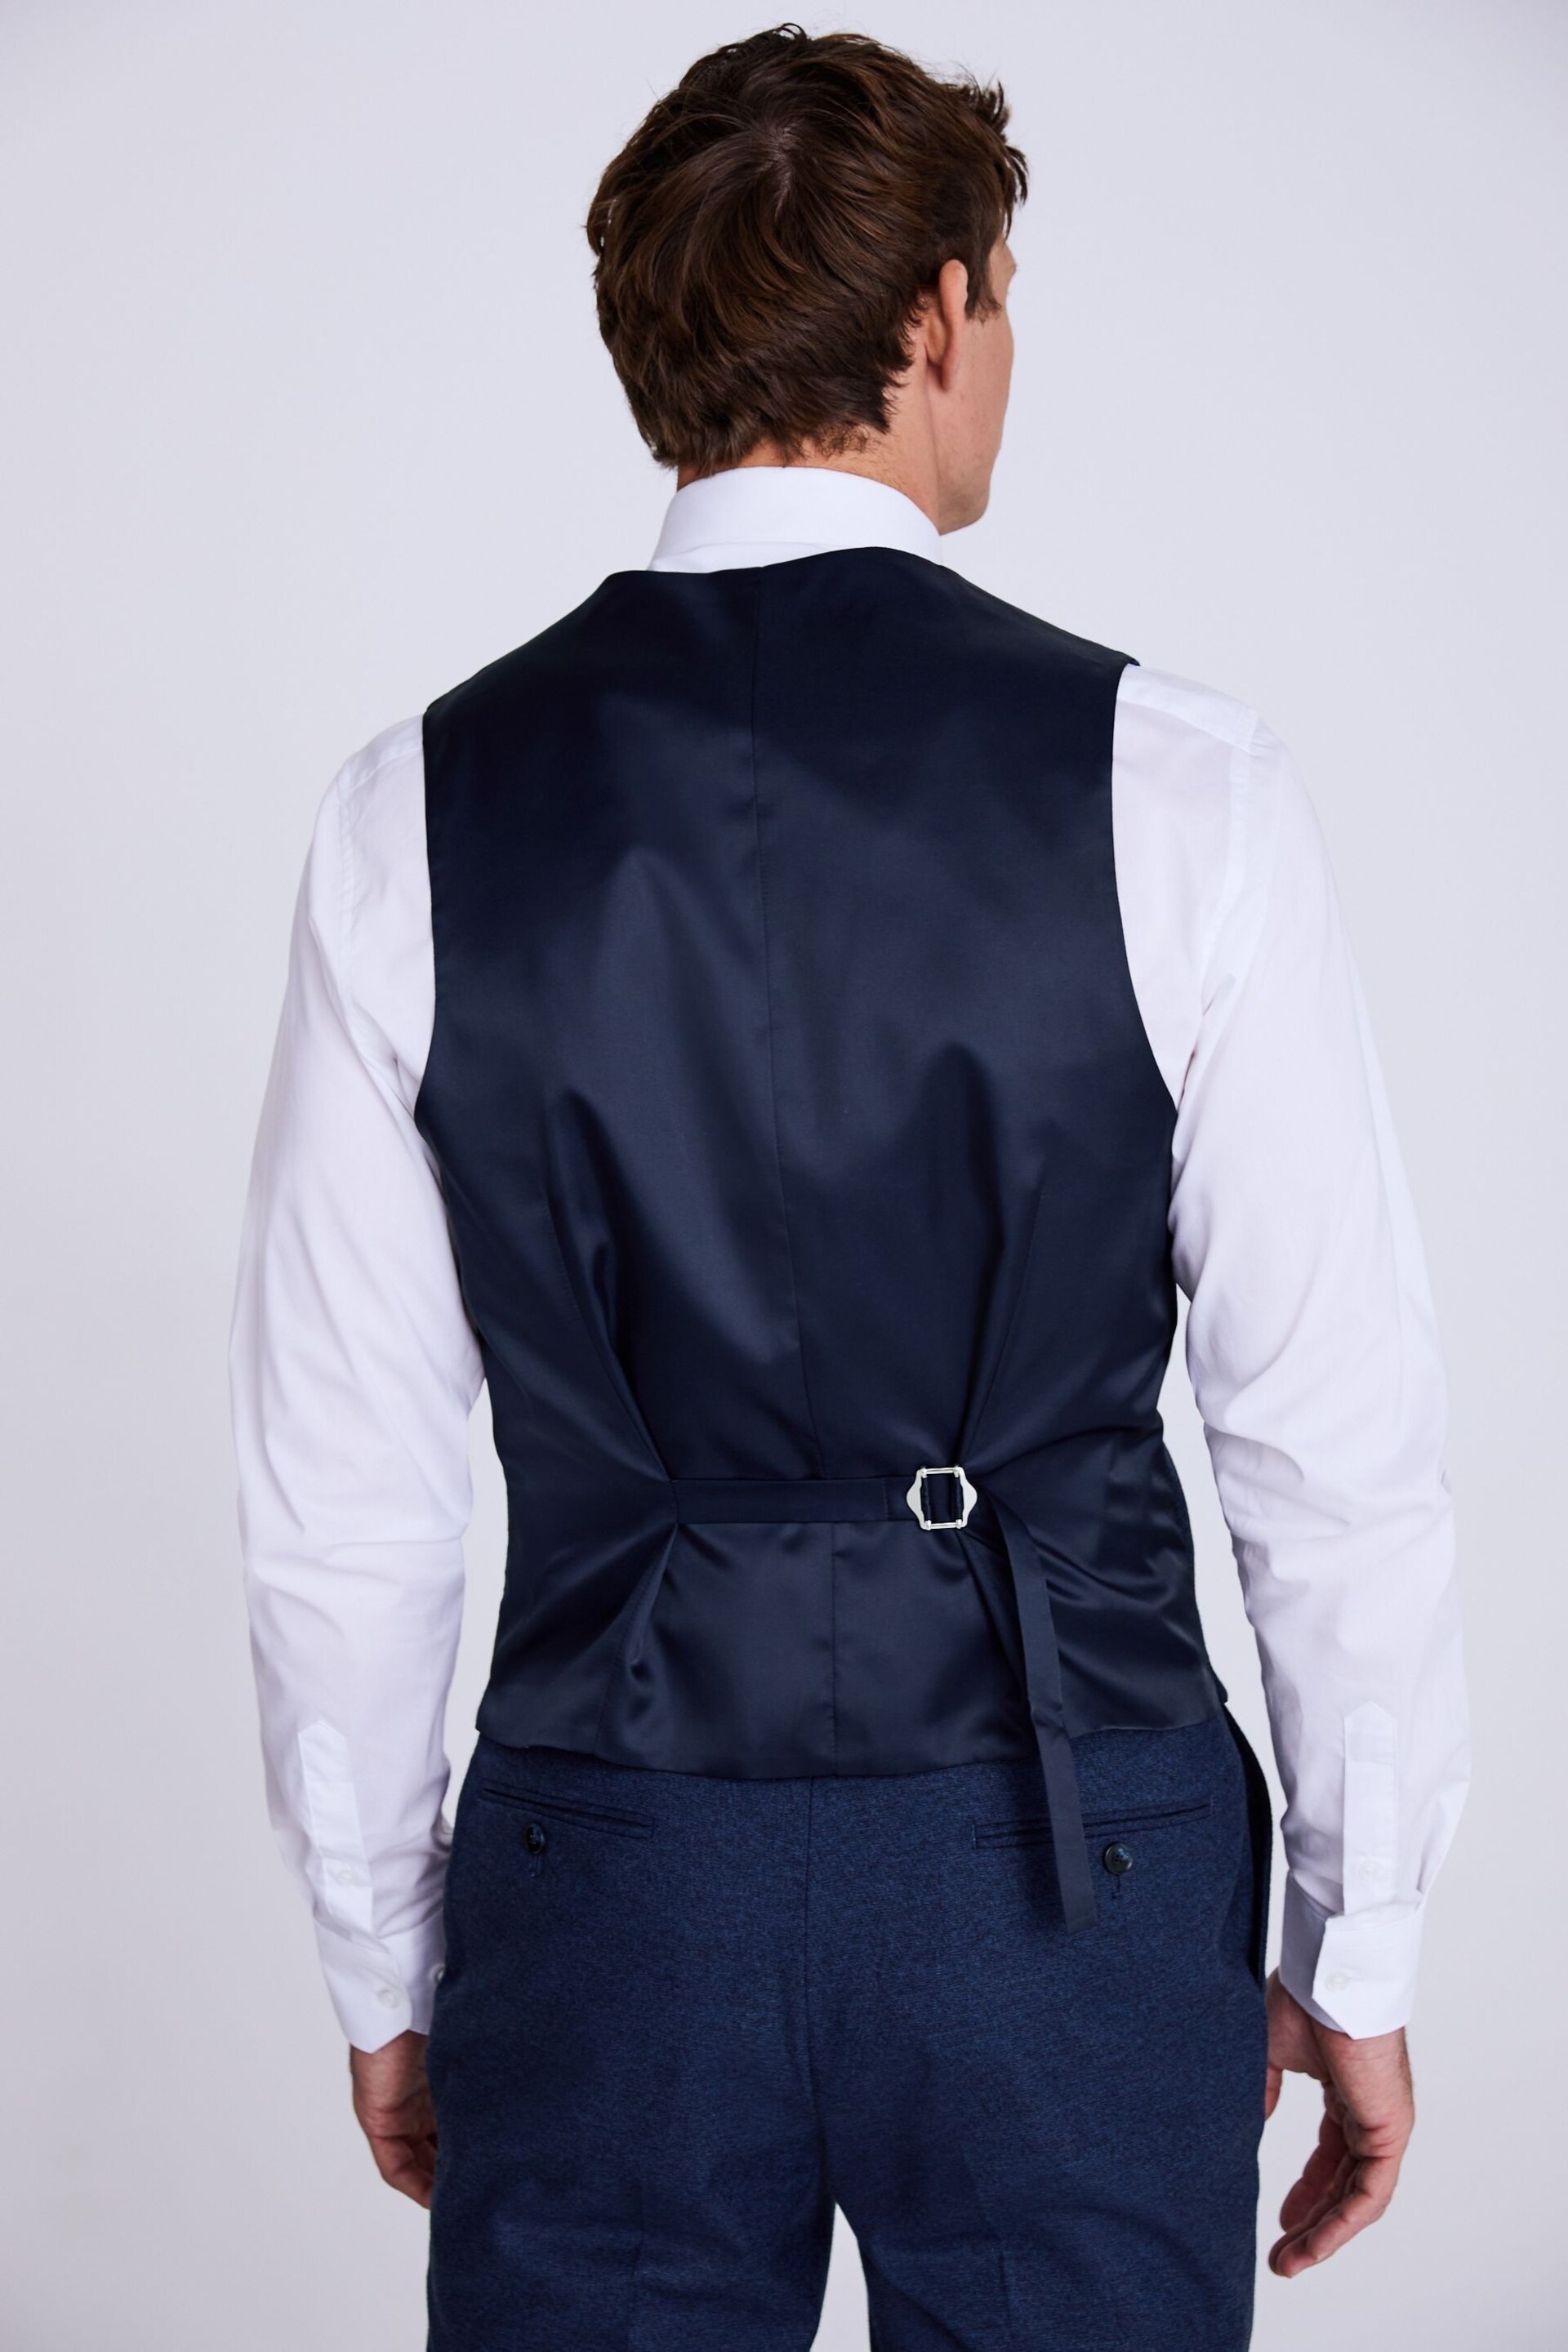 MOSS Tailored Fit Blue Flannel Waistcoat - Image 2 of 3